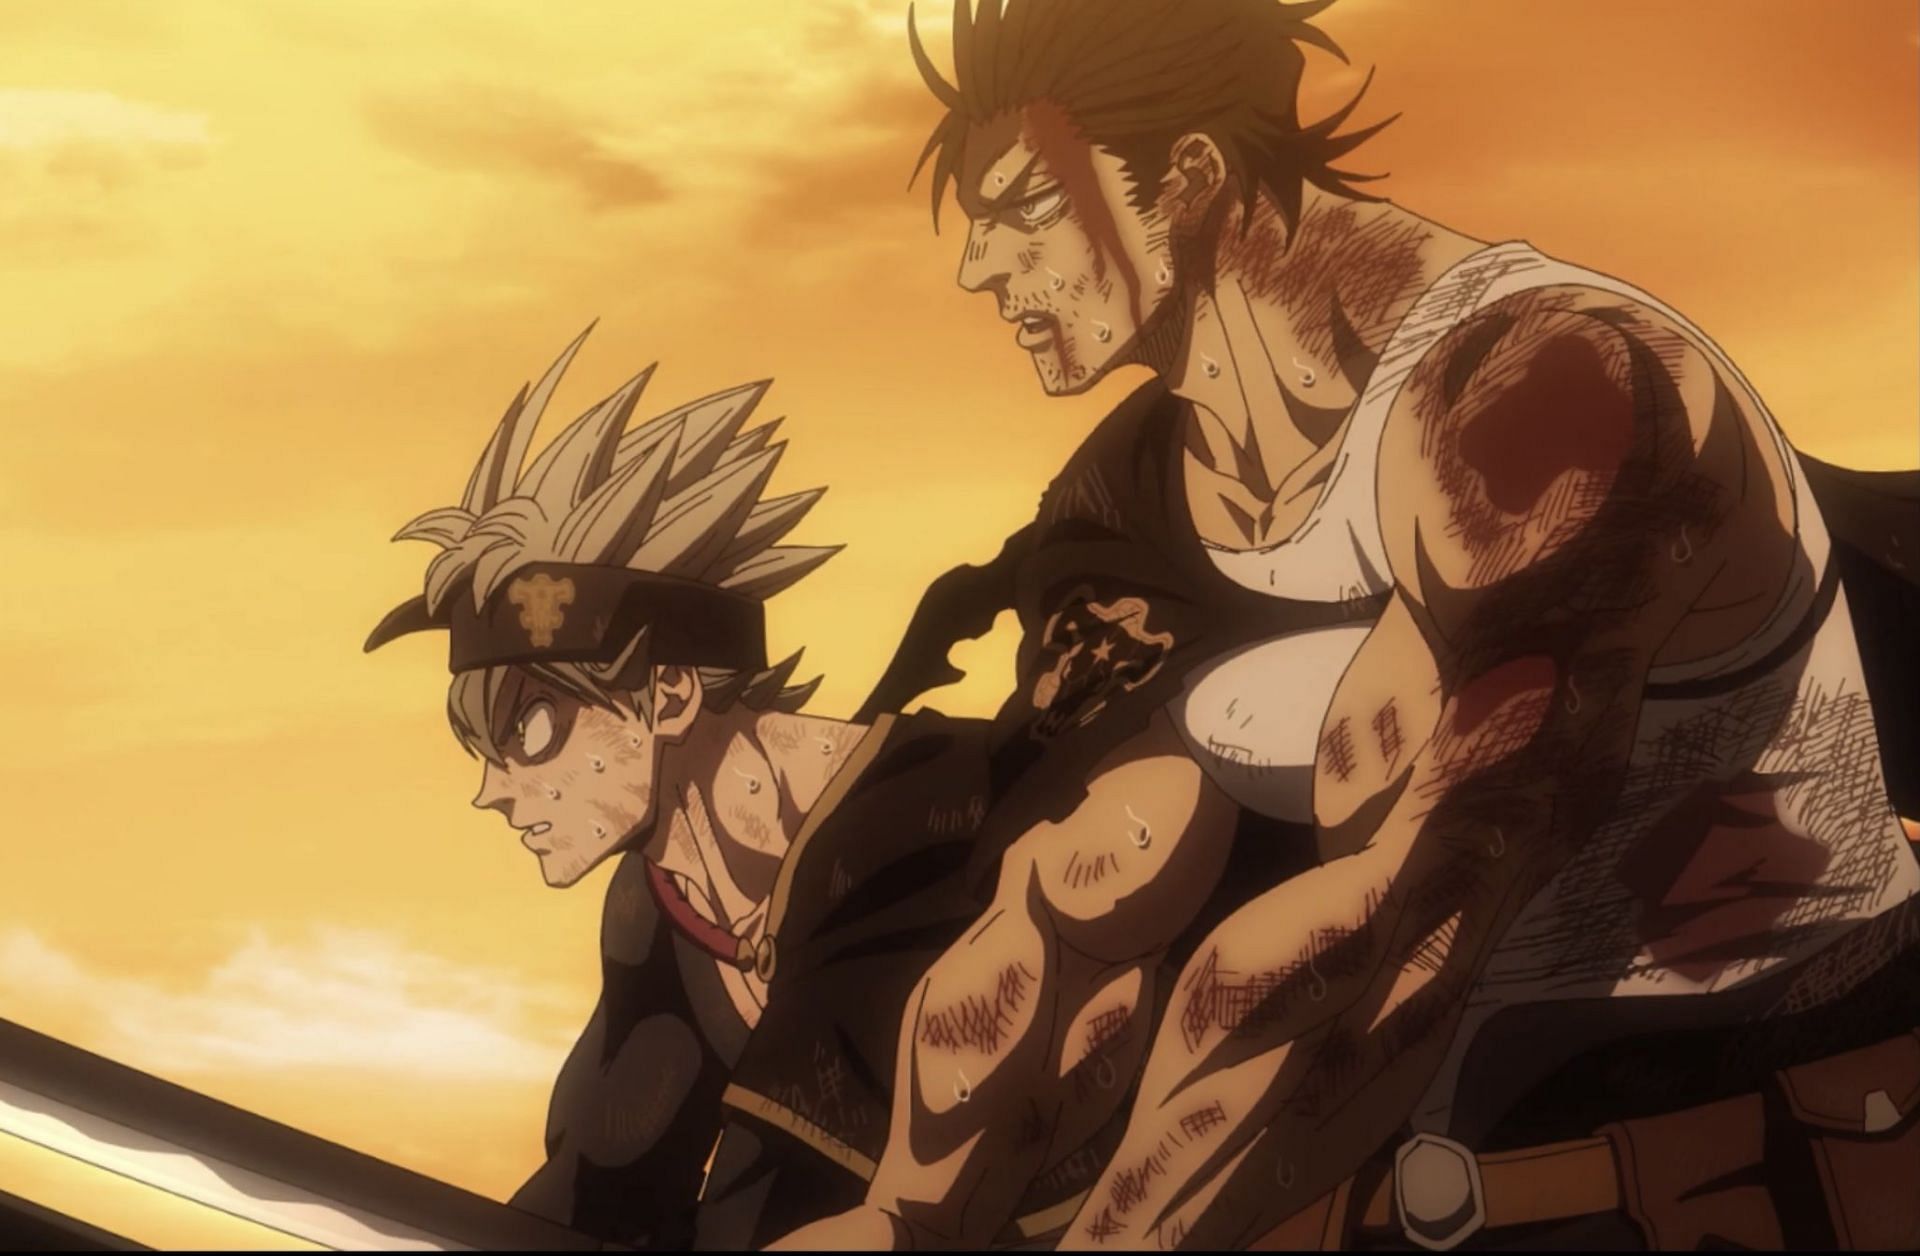 Asta and the captain in their fight against Lucifer (Image via studio Pierrot)